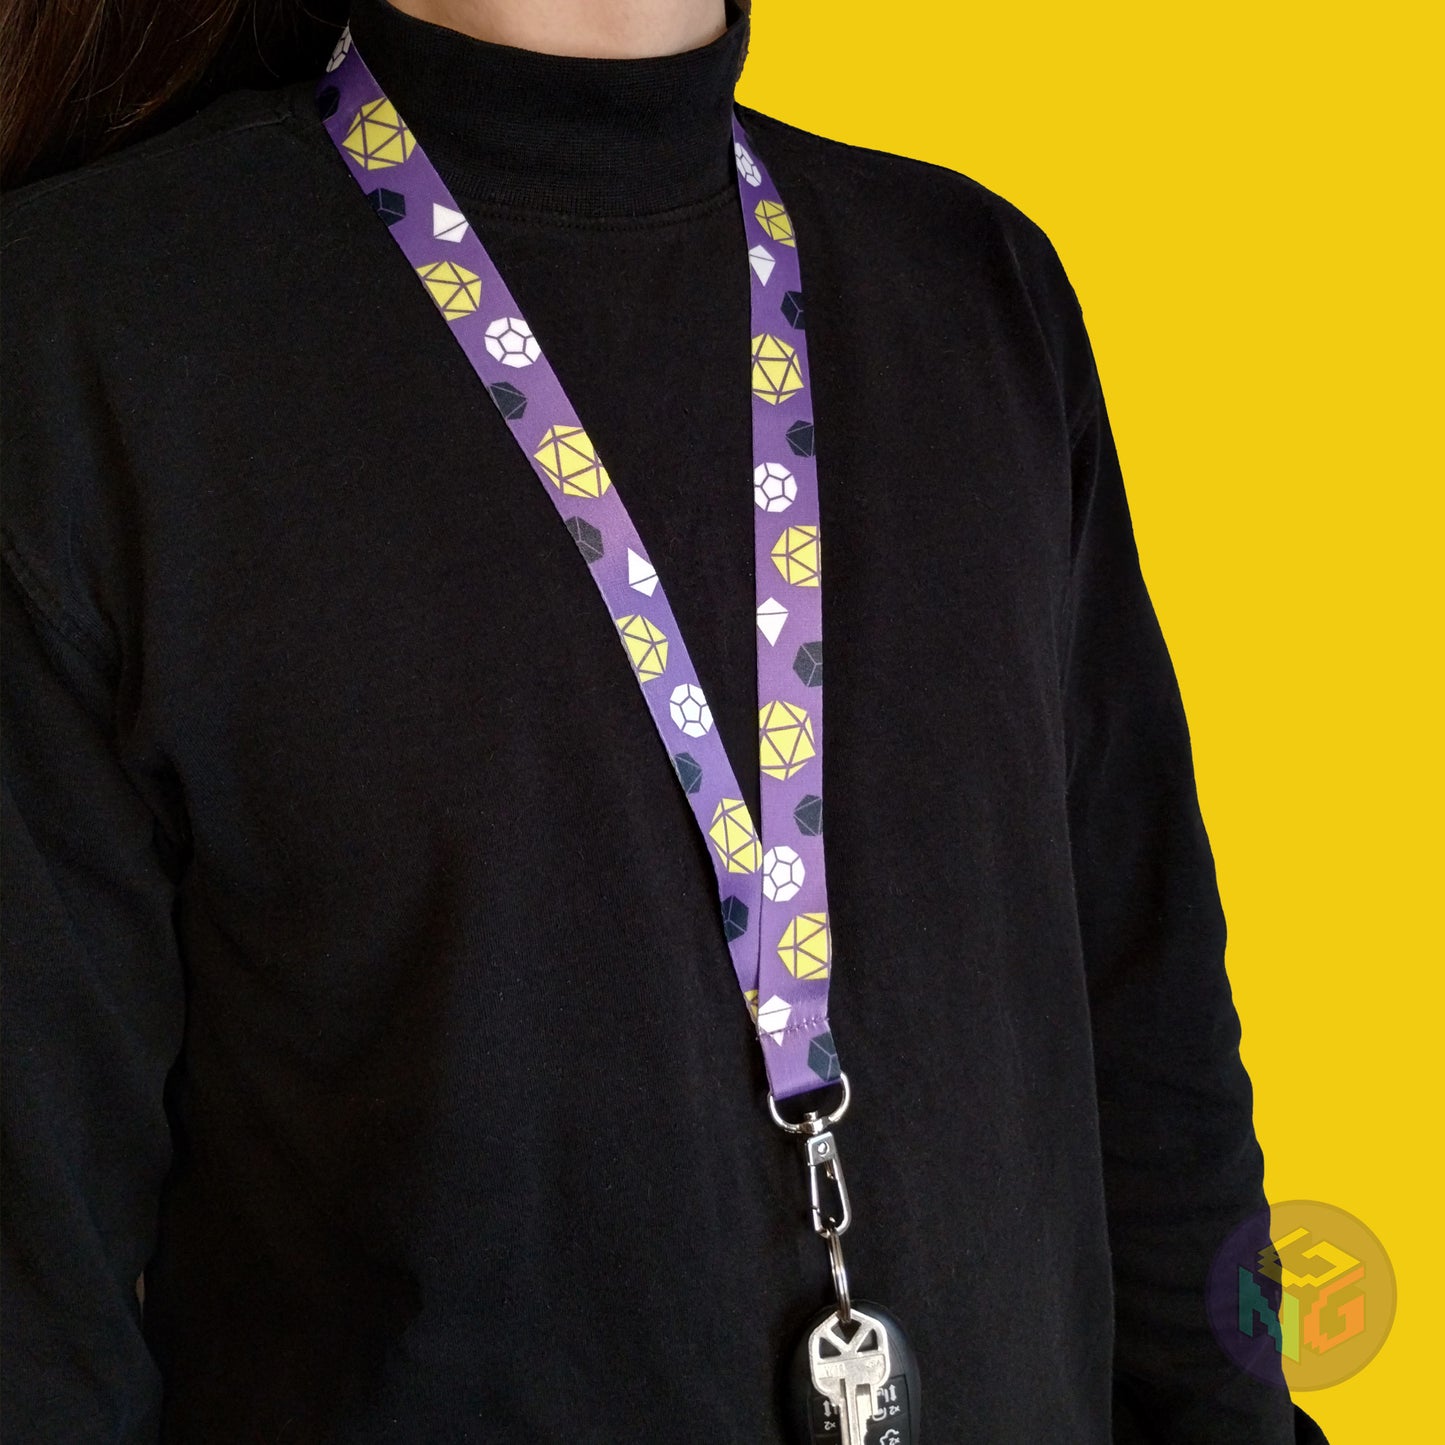 purple nonbinary pride lanyard being worn by a flat chested person wearing a black turtleneck. The end of the lanyard falls between their sternum and bellybutton and has a key fob clipped to the end